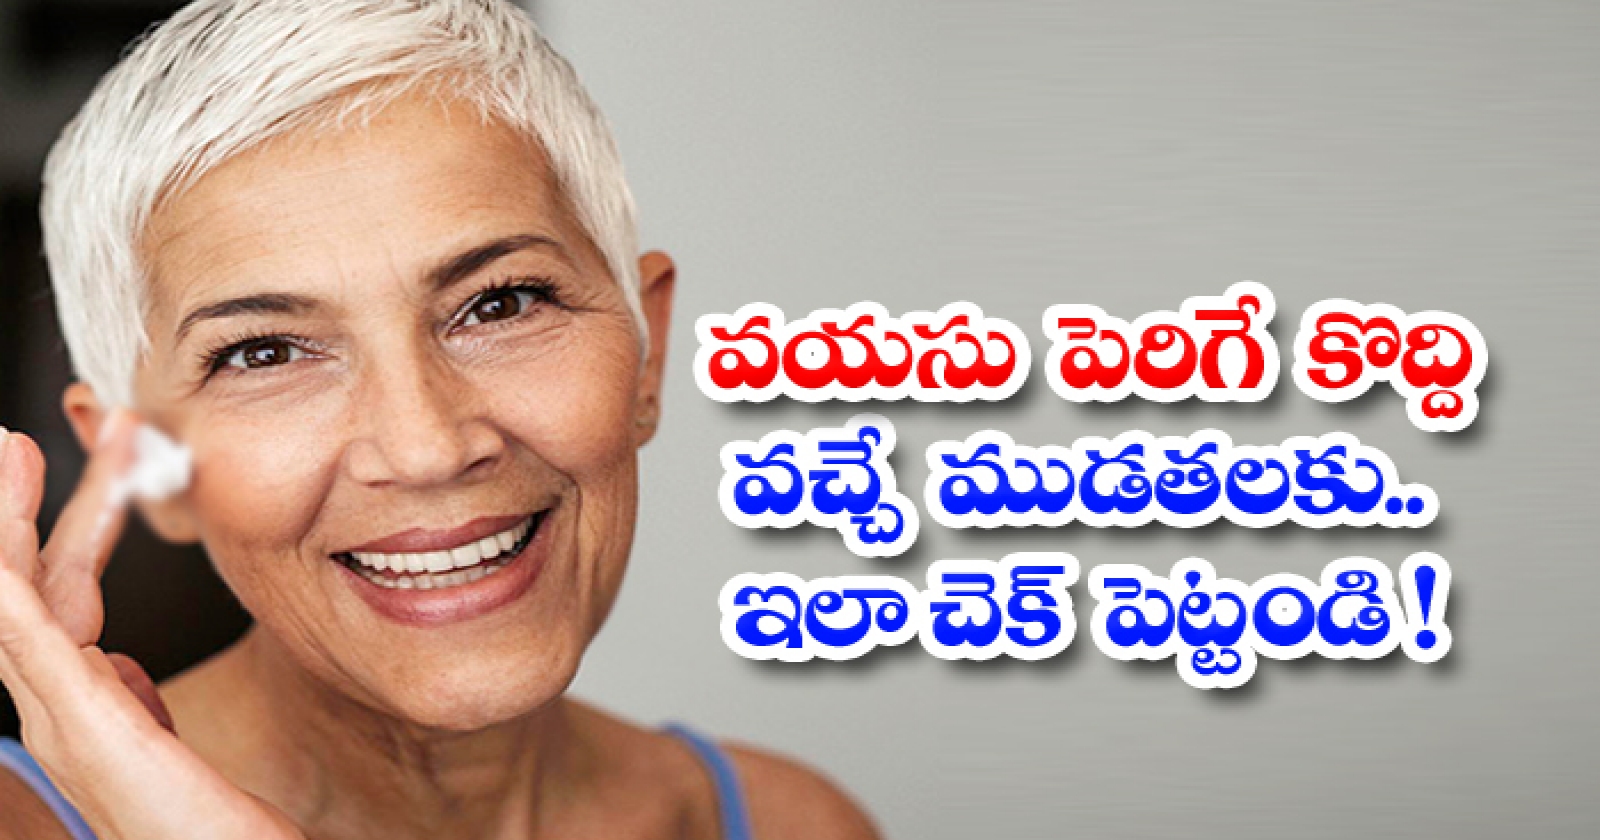  Home Remedies For How To Reduce Wrinkles-TeluguStop.com